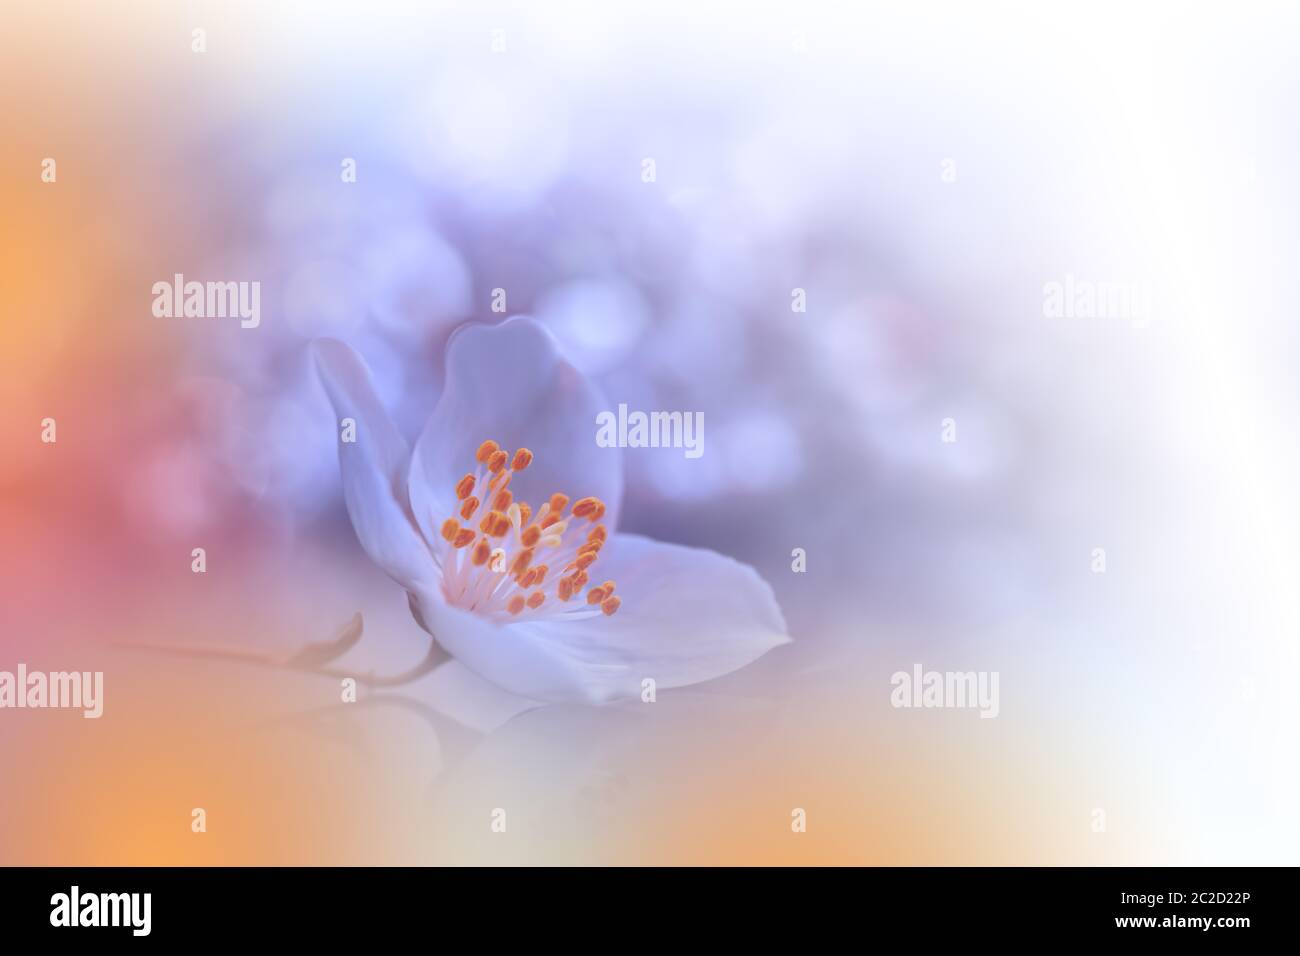 Macro Photography.Floral abstract pastel background with copy space.White Jasmine flowers in soft style for wedding card.Orange Nature Background.Blurred space for your text.Wedding Invitation.Tranquil nature closeup view.Coral color backdrop 2019. Stock Photo